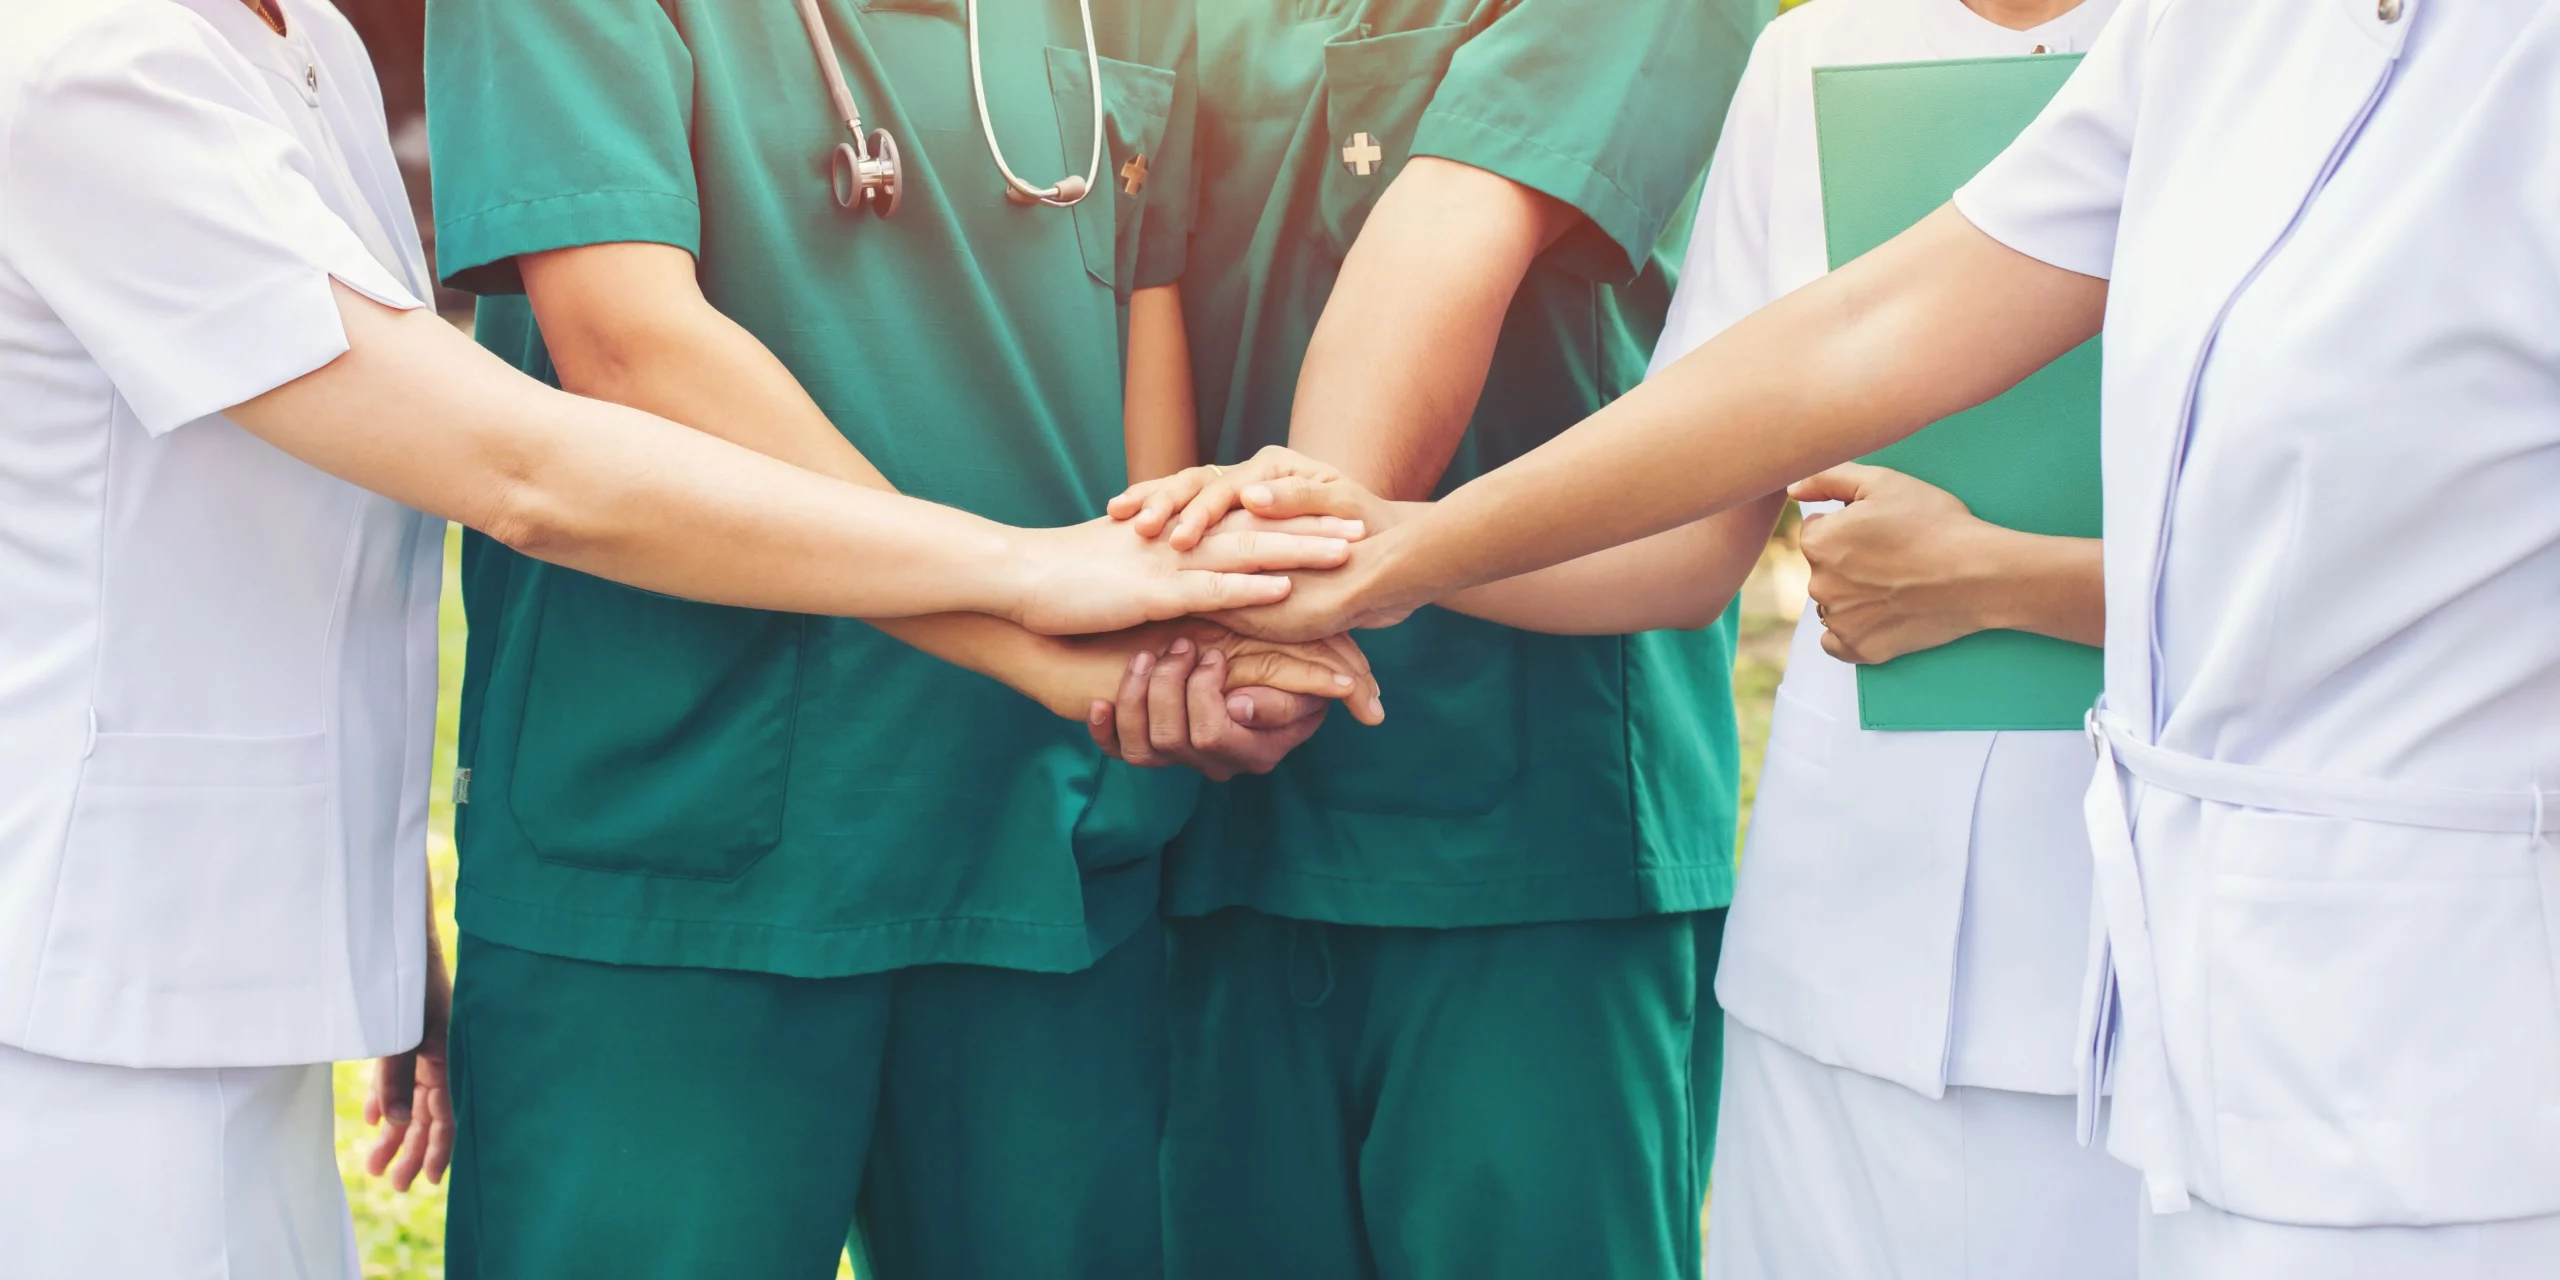 Nurses holding hands as a mark of co-operation